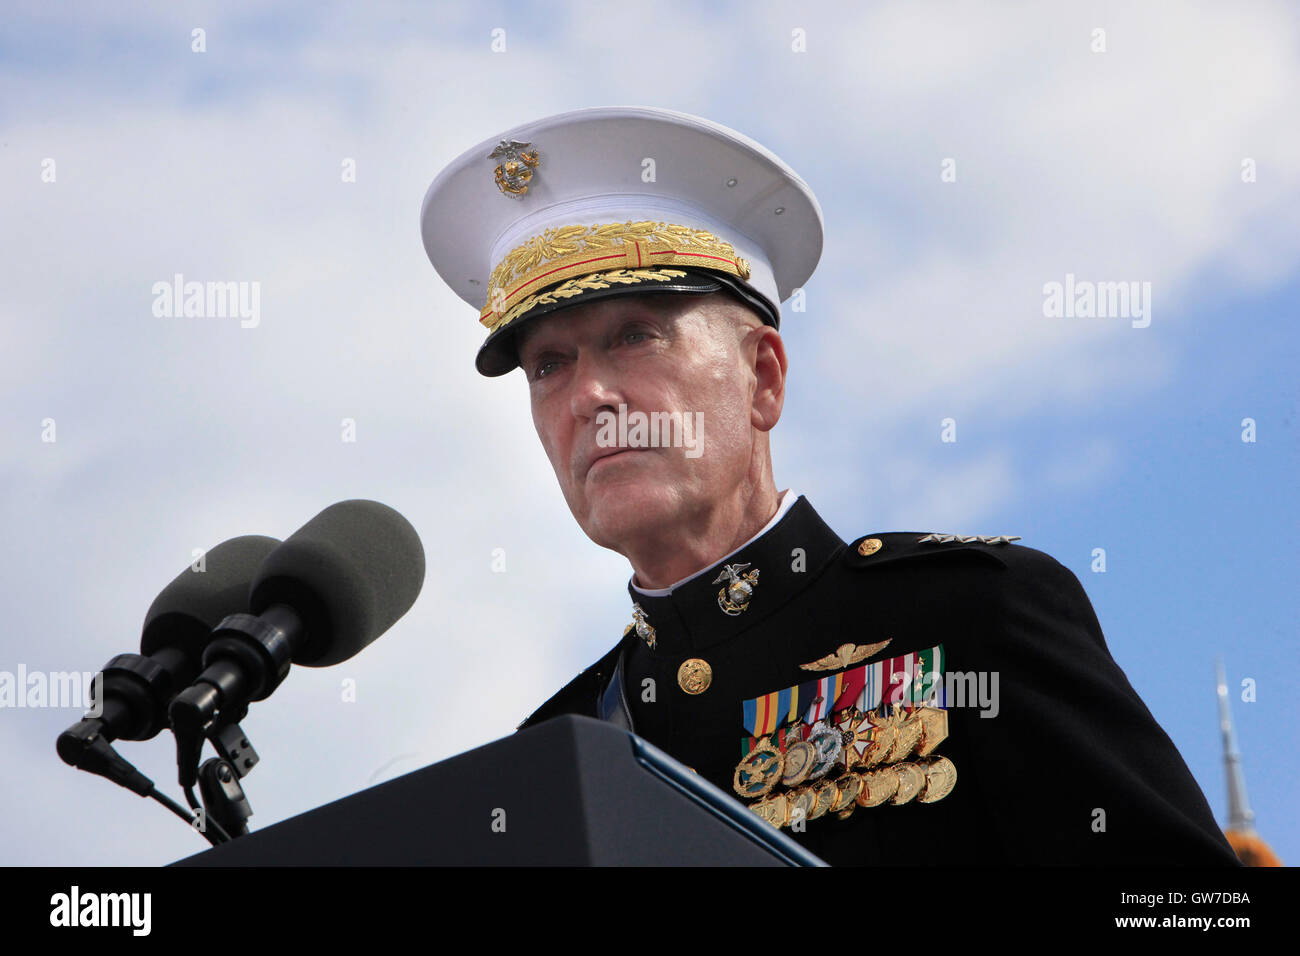 WASHINGTON DC - SEPTEMBER 11: United States Marine Corps General Joseph F. Dunford Jr., Chairman of the Joint Chiefs of Staff, makes remarks at the Pentagon Memorial in Washington, DC during an observance ceremony to commemorate the 15th anniversary of the 9/11 terrorist attacks, Sunday, September 11, 2016.  Credit: Dennis Brack / Pool via CNP/MediaPunch Stock Photo